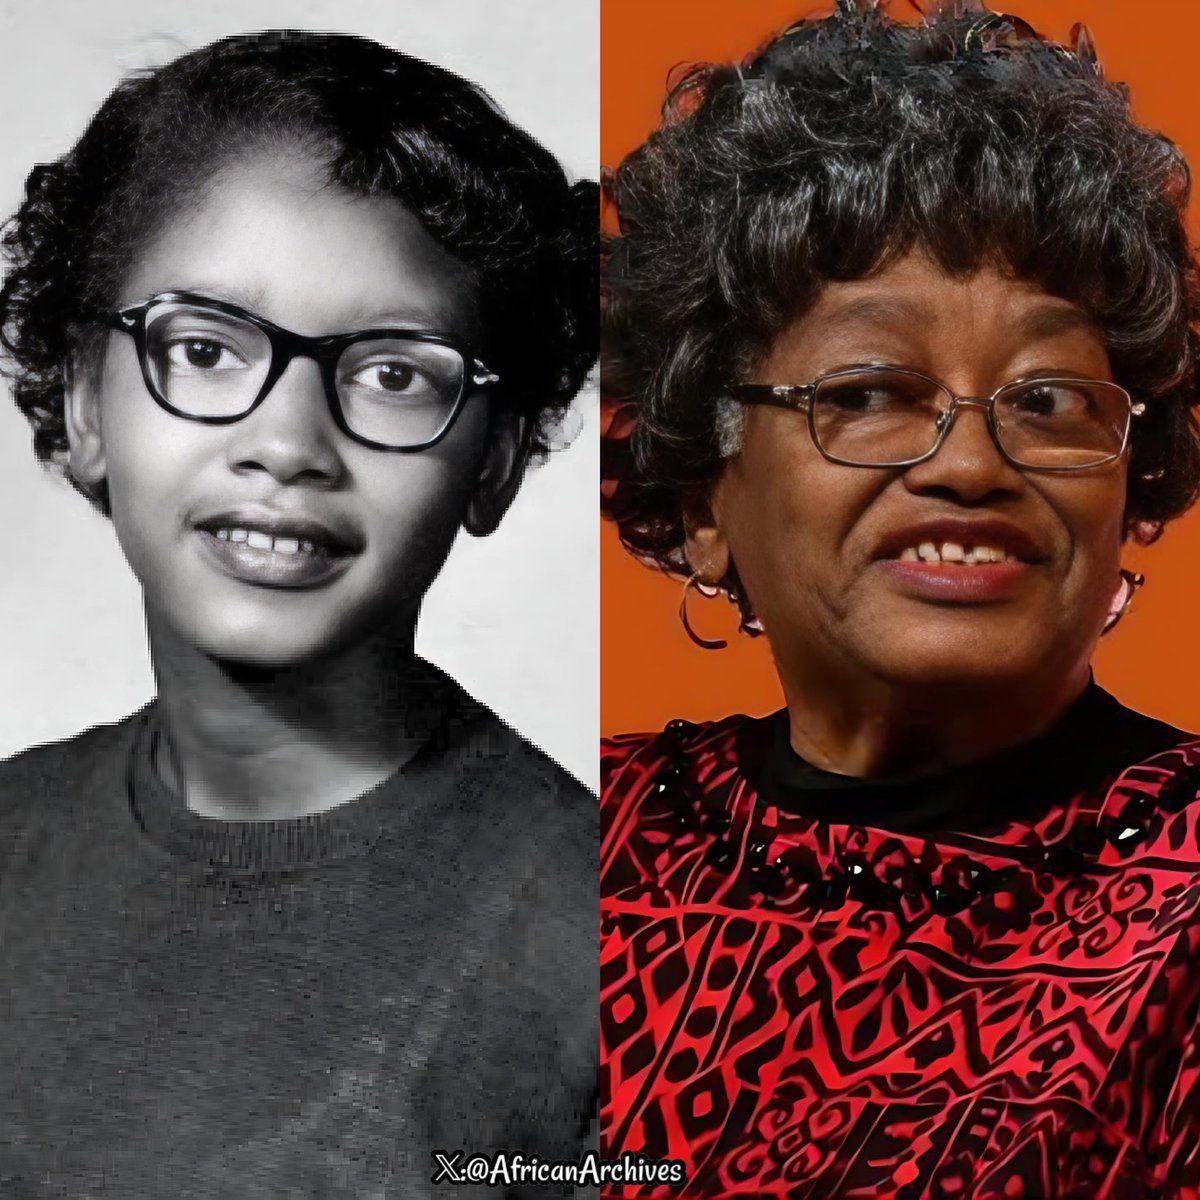 On this day in 1955, Claudette Colvin,15, was arrested for refusing to give her seat to a white woman on a public bus in Montgomery, Alabama. She was arrested 9 months before Rosa Parks, but NAACP didn't want her to represent their organization because she was 15 and pregnant.